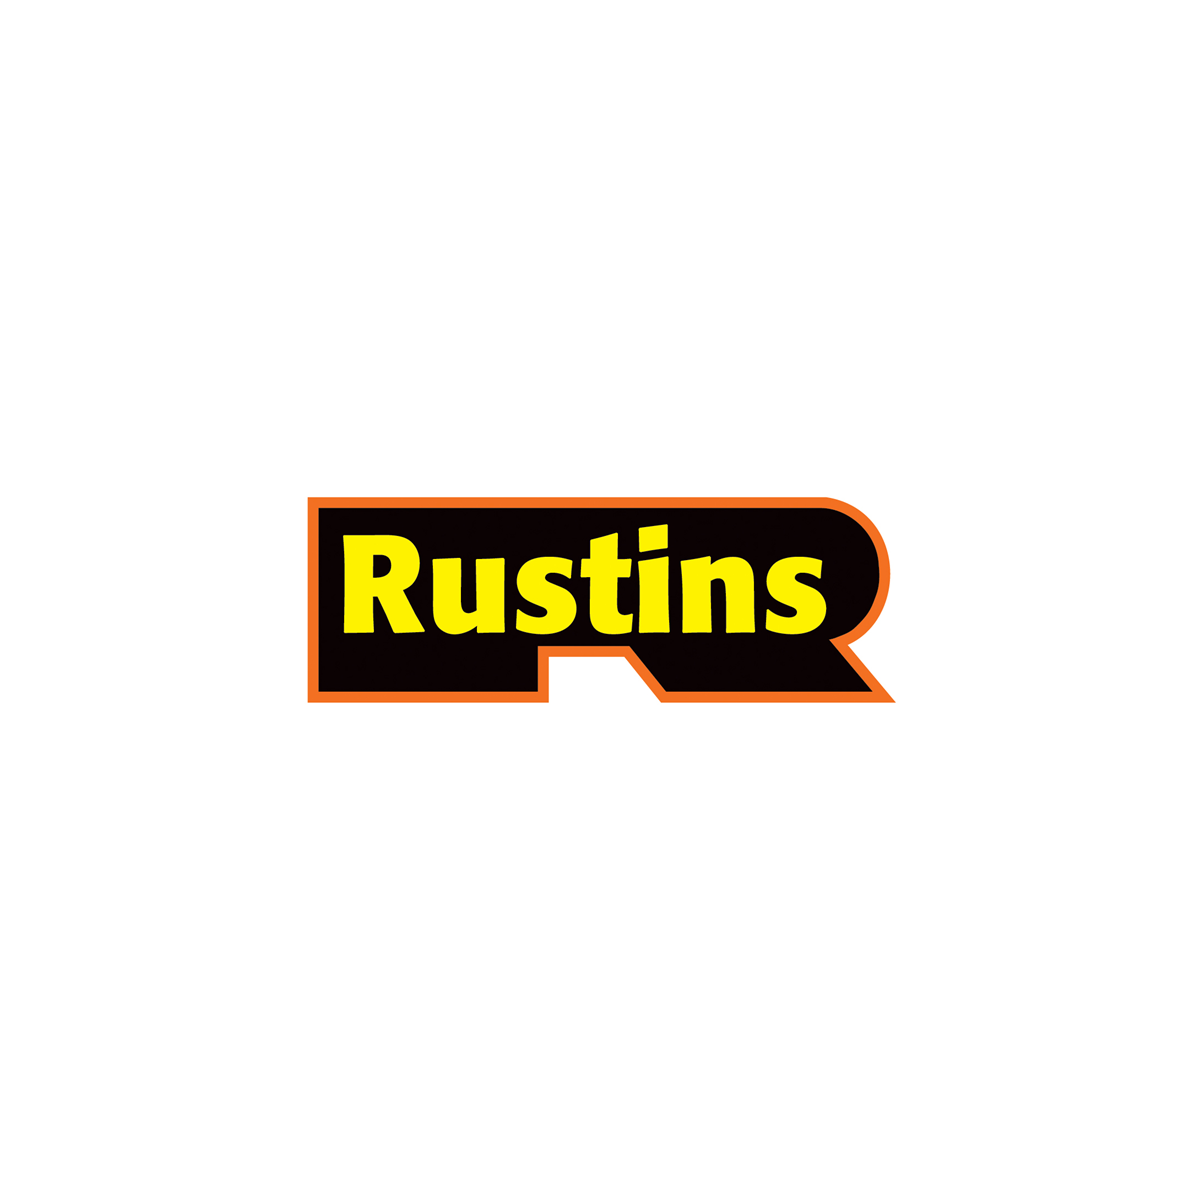 Where to buy Rustins Scratch Covers